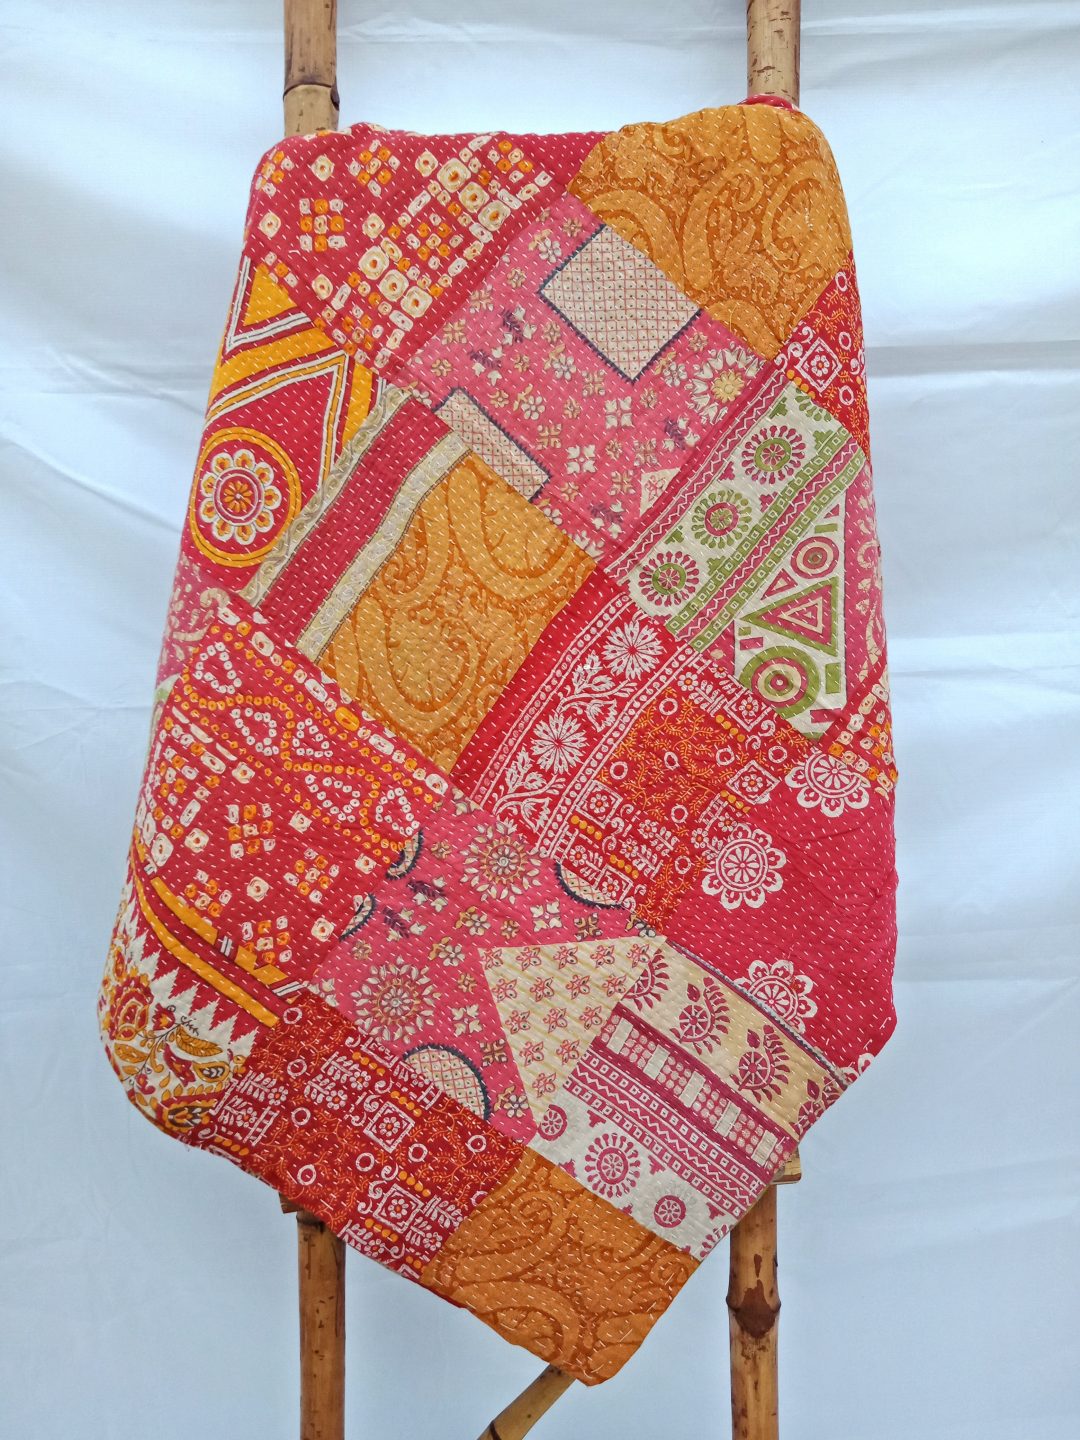 Indian Patchwork Kantha Quilt | Vintage Kantha Quilts and Throws